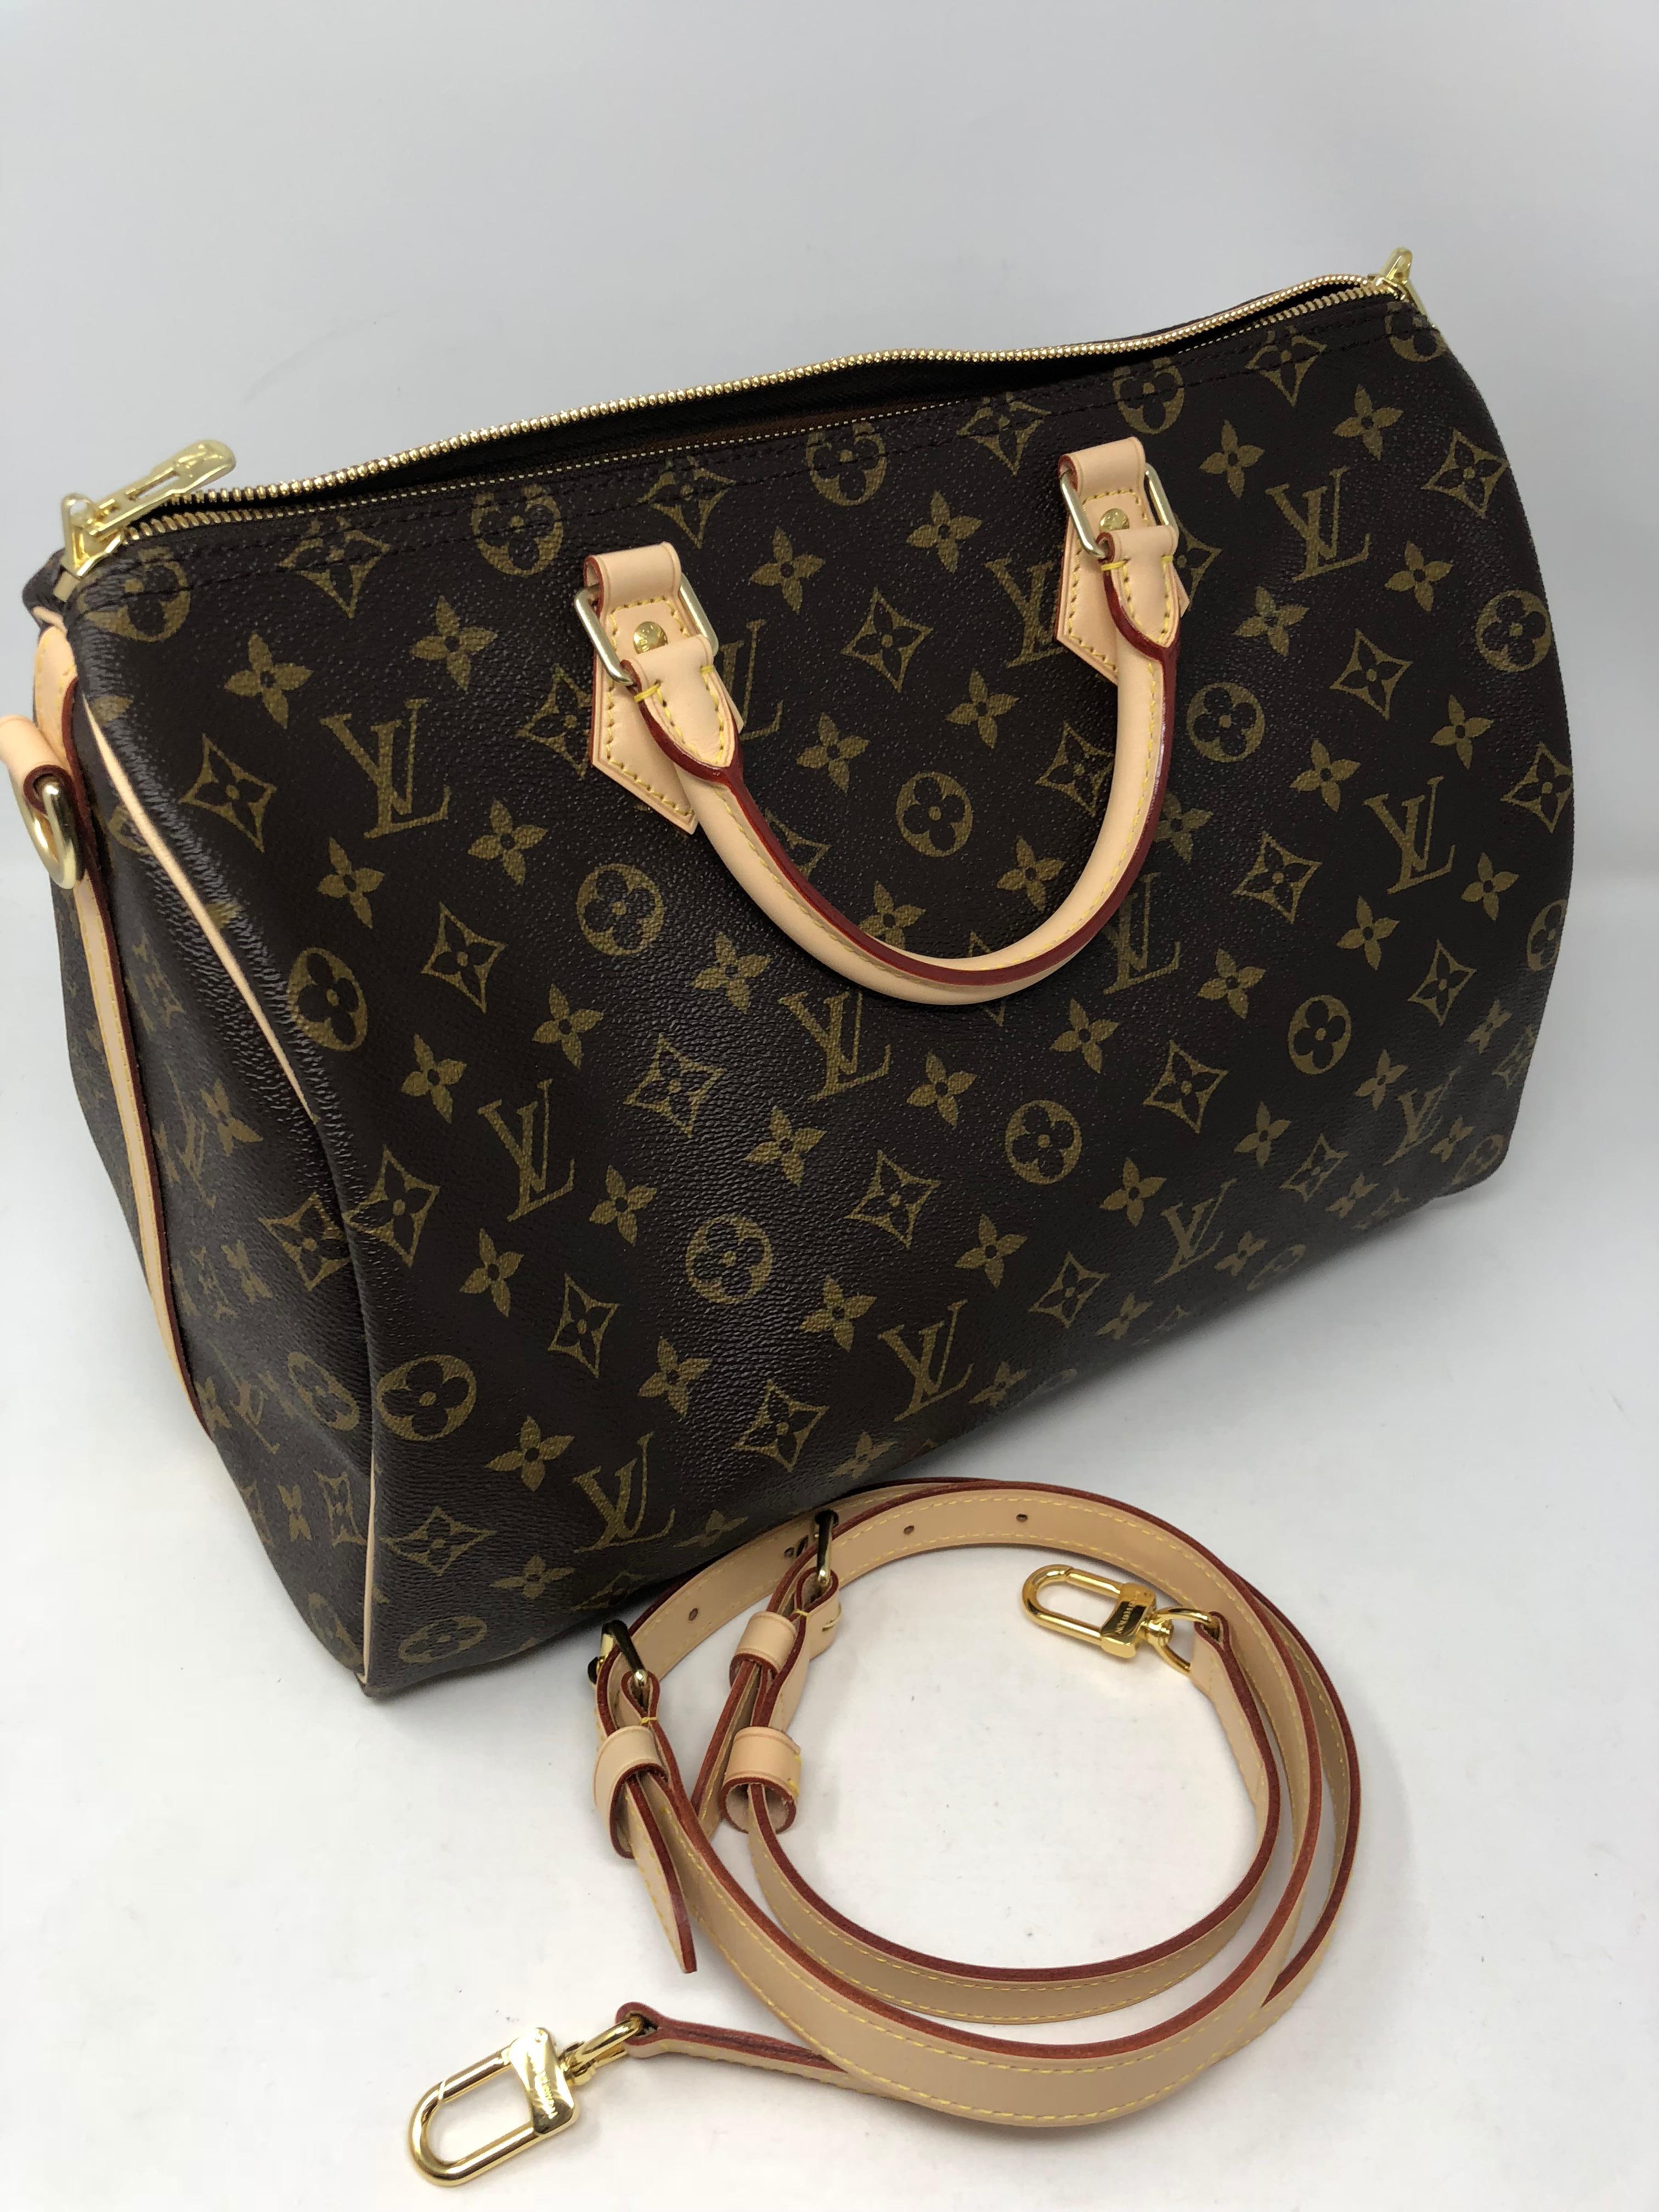 Louis Vuitton Speedy 35 Bandouliere Monogram with removable strap. This iconic bag in monogram is limited and sold out. Brand new with dust cover, lock and keys, and box. A staple for your collection. 